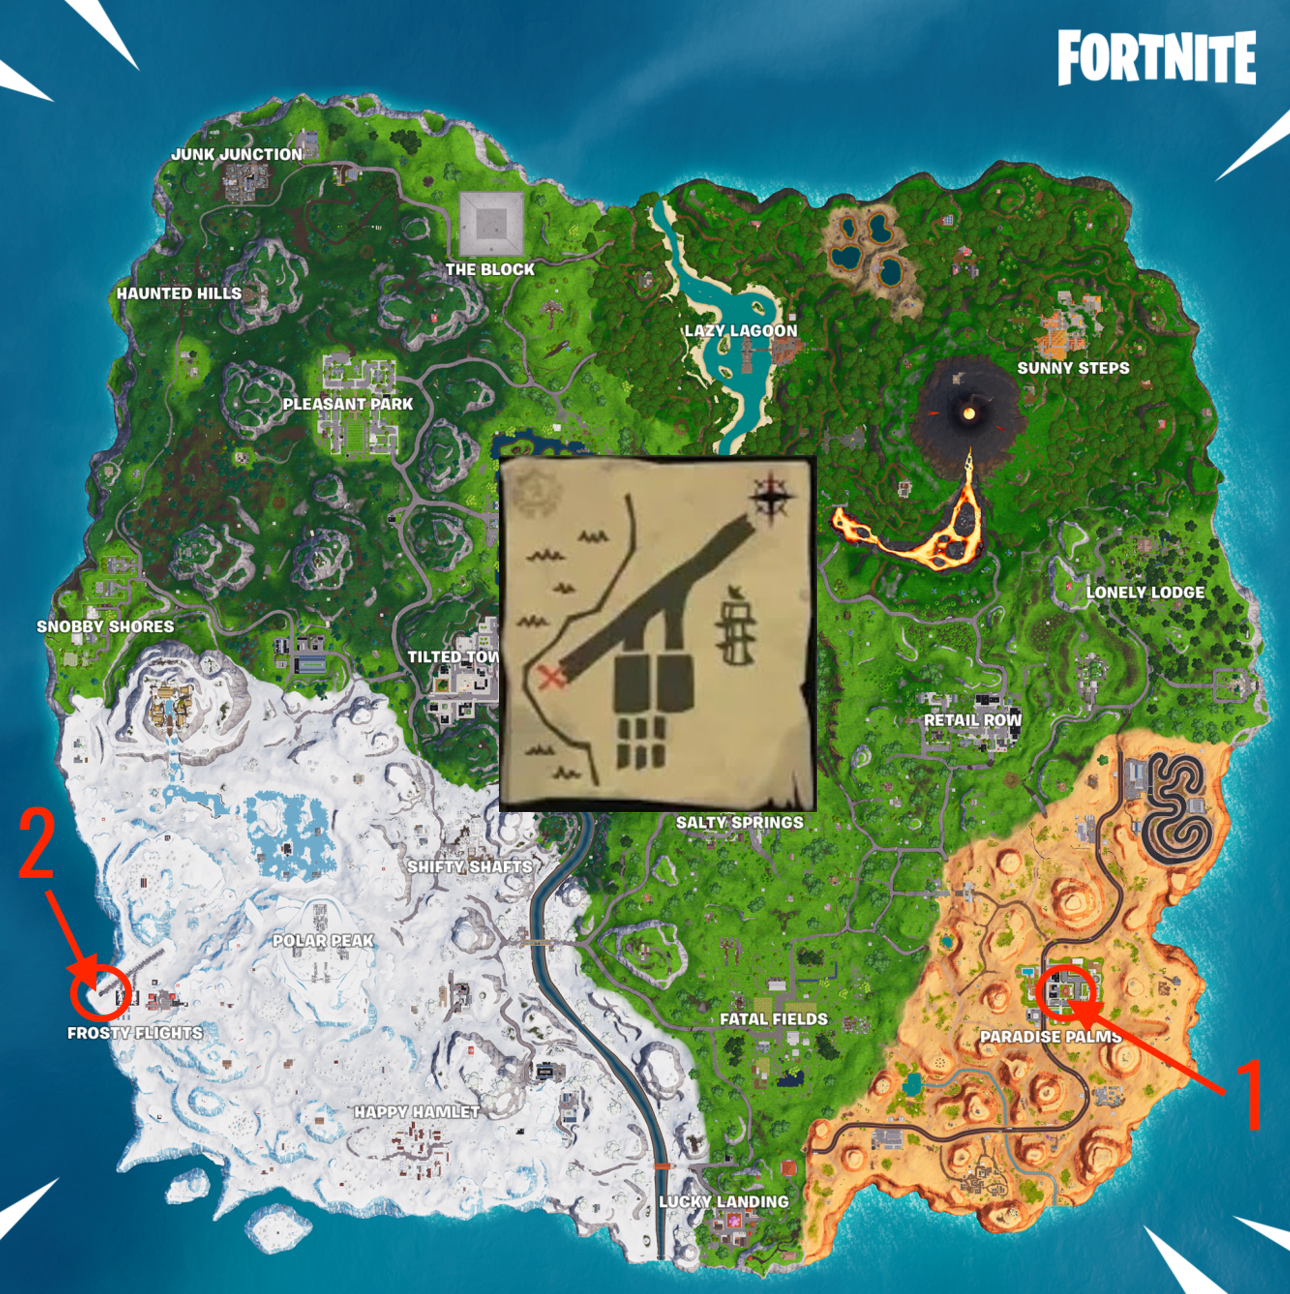 follow the treasure map signpost found in paradise palms